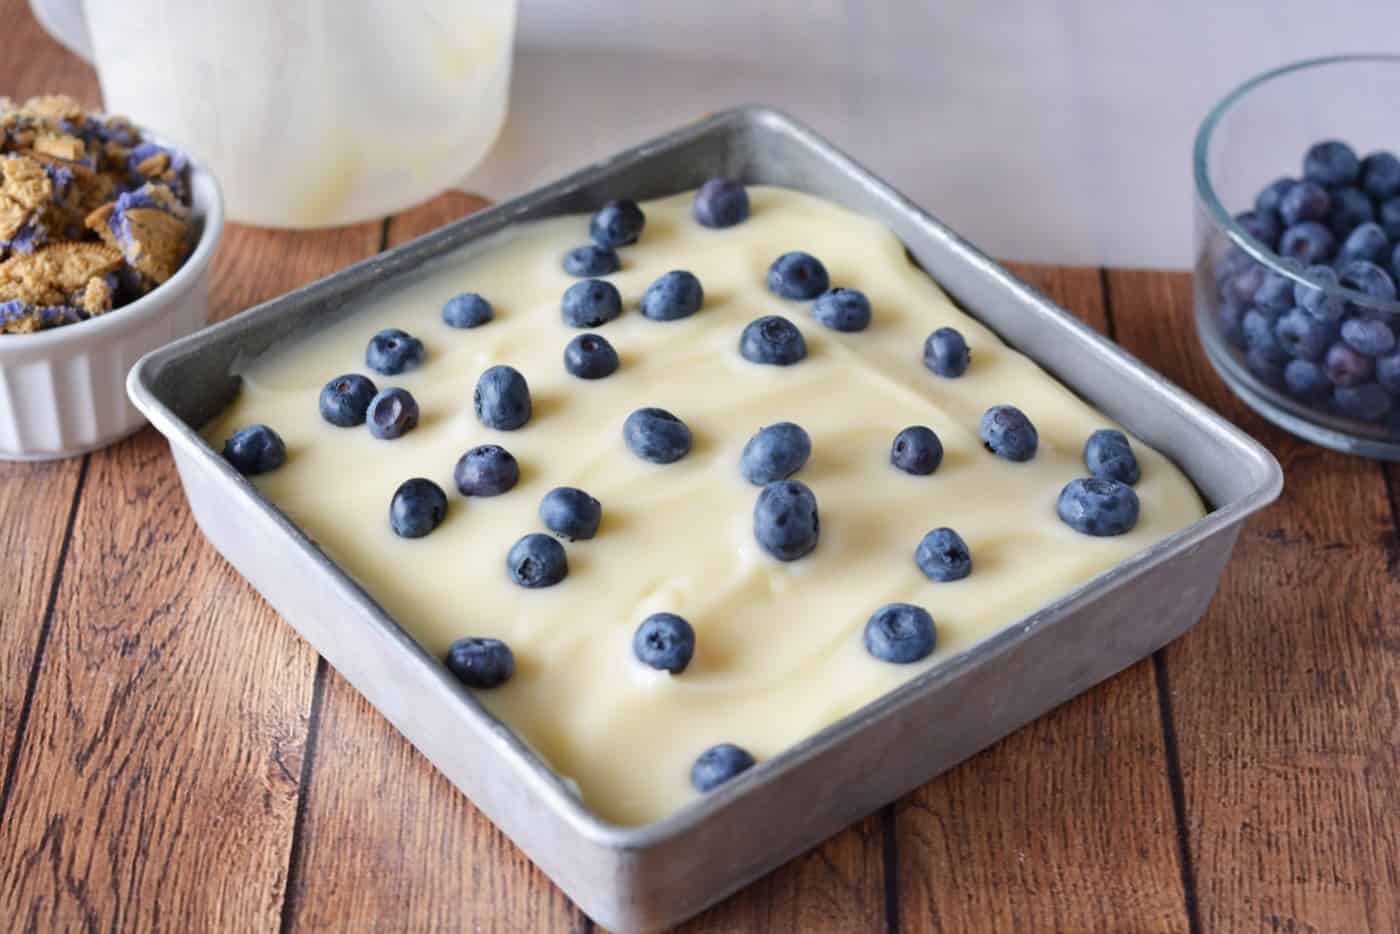 Pudding spread across the top with blueberries